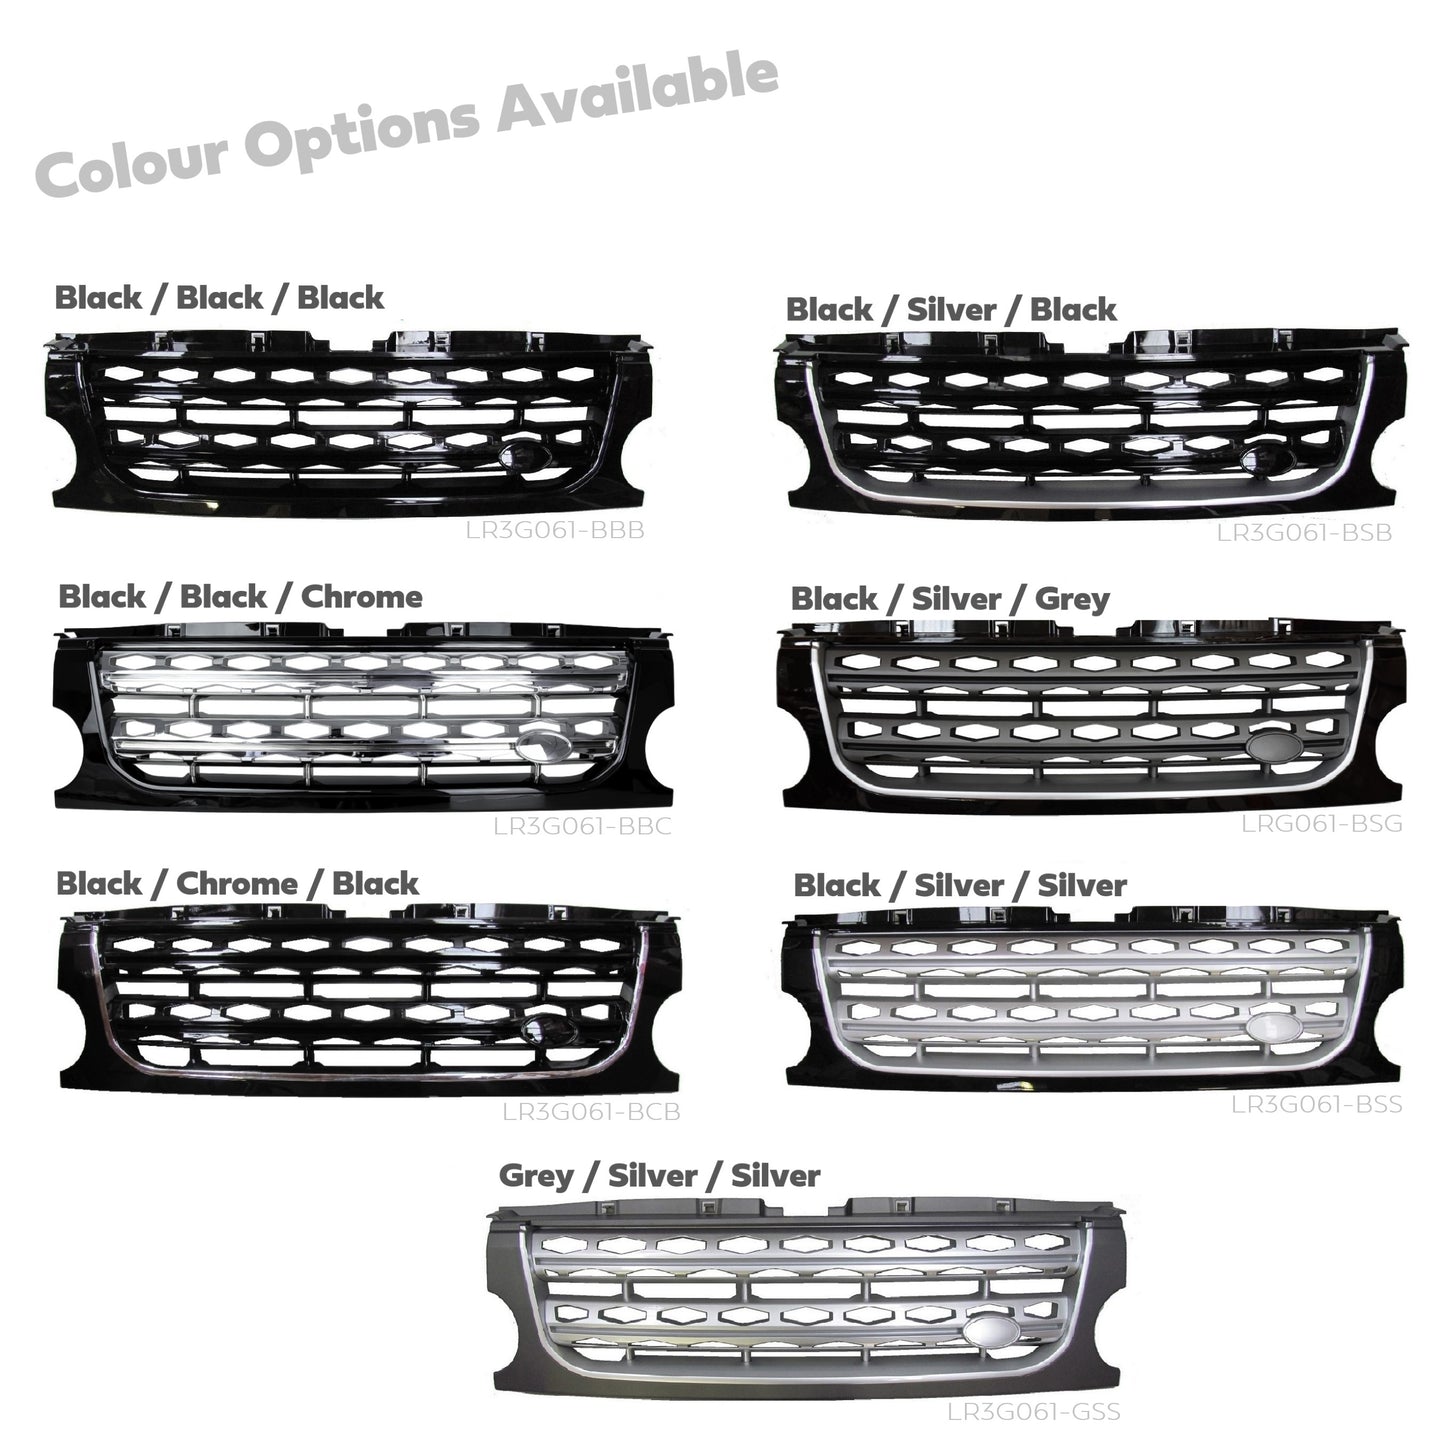 Front Grille for Land Rover Discovery 3 - Disco 4 look - Black / Silver / Silver